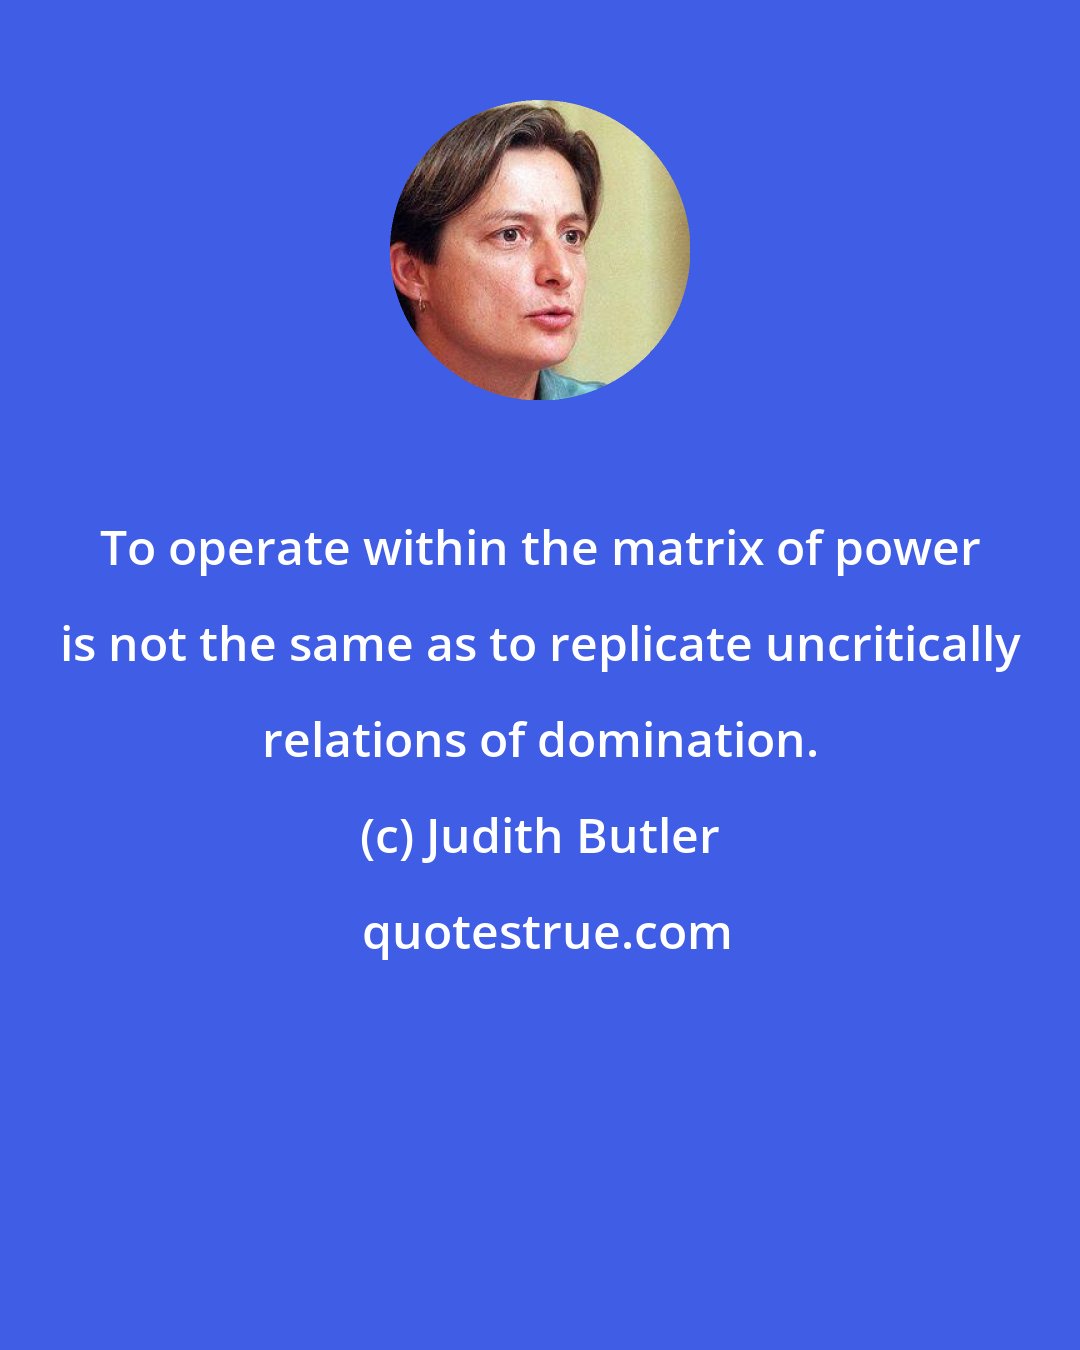 Judith Butler: To operate within the matrix of power is not the same as to replicate uncritically relations of domination.